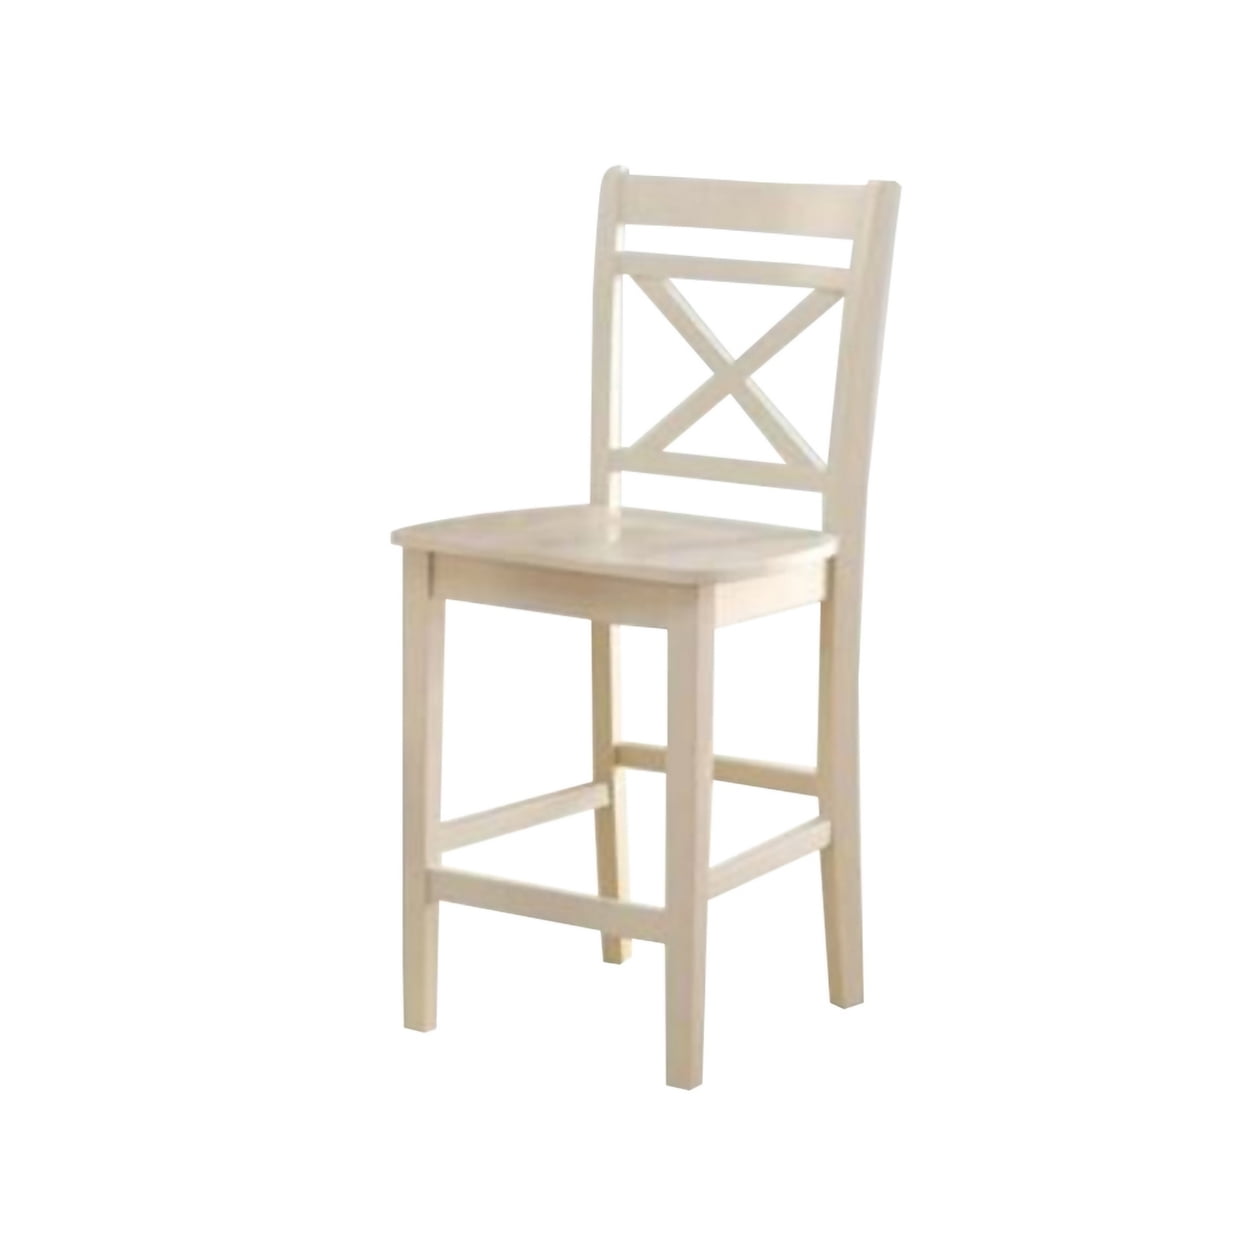 Acme United 72547 39 in. Tartys Counter Height Chair, Cream - Set of 2